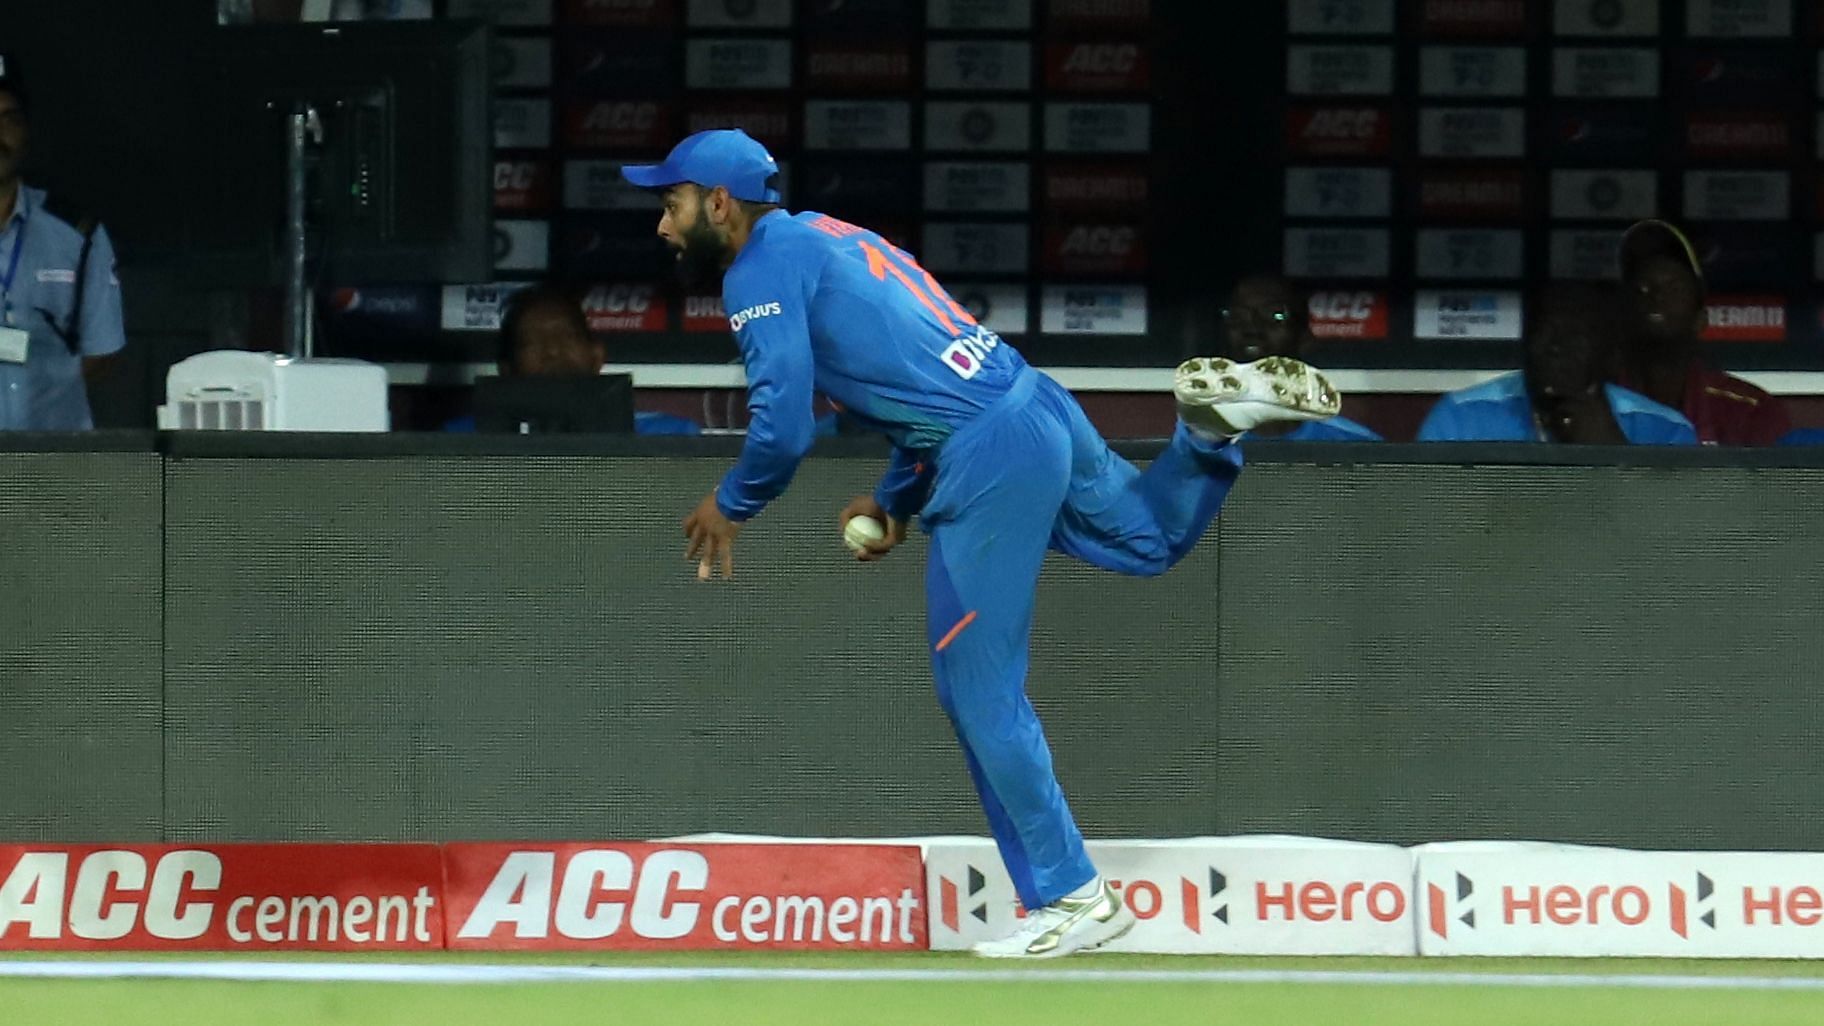 Virat Kohli, who was standing at long-on, sprinted to his right, threw himself in the air and caught the ball to dismiss Shimron Hetmyer.&nbsp;